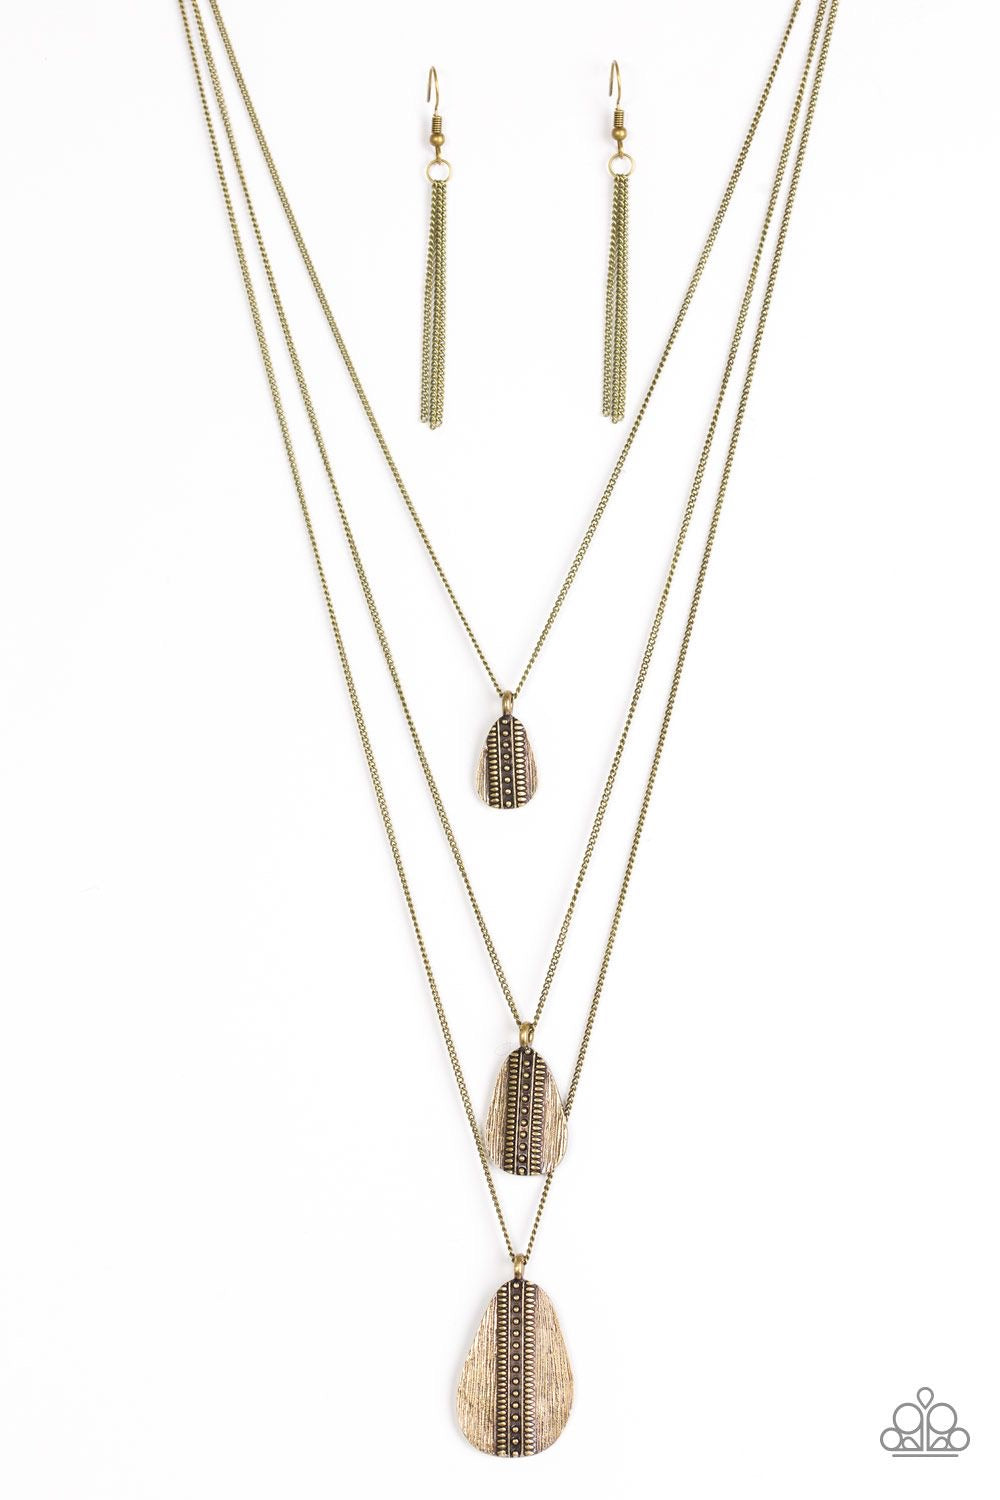 Paparazzi Accessories  - Sonoran Storm #N478 Peg - Brass Necklace